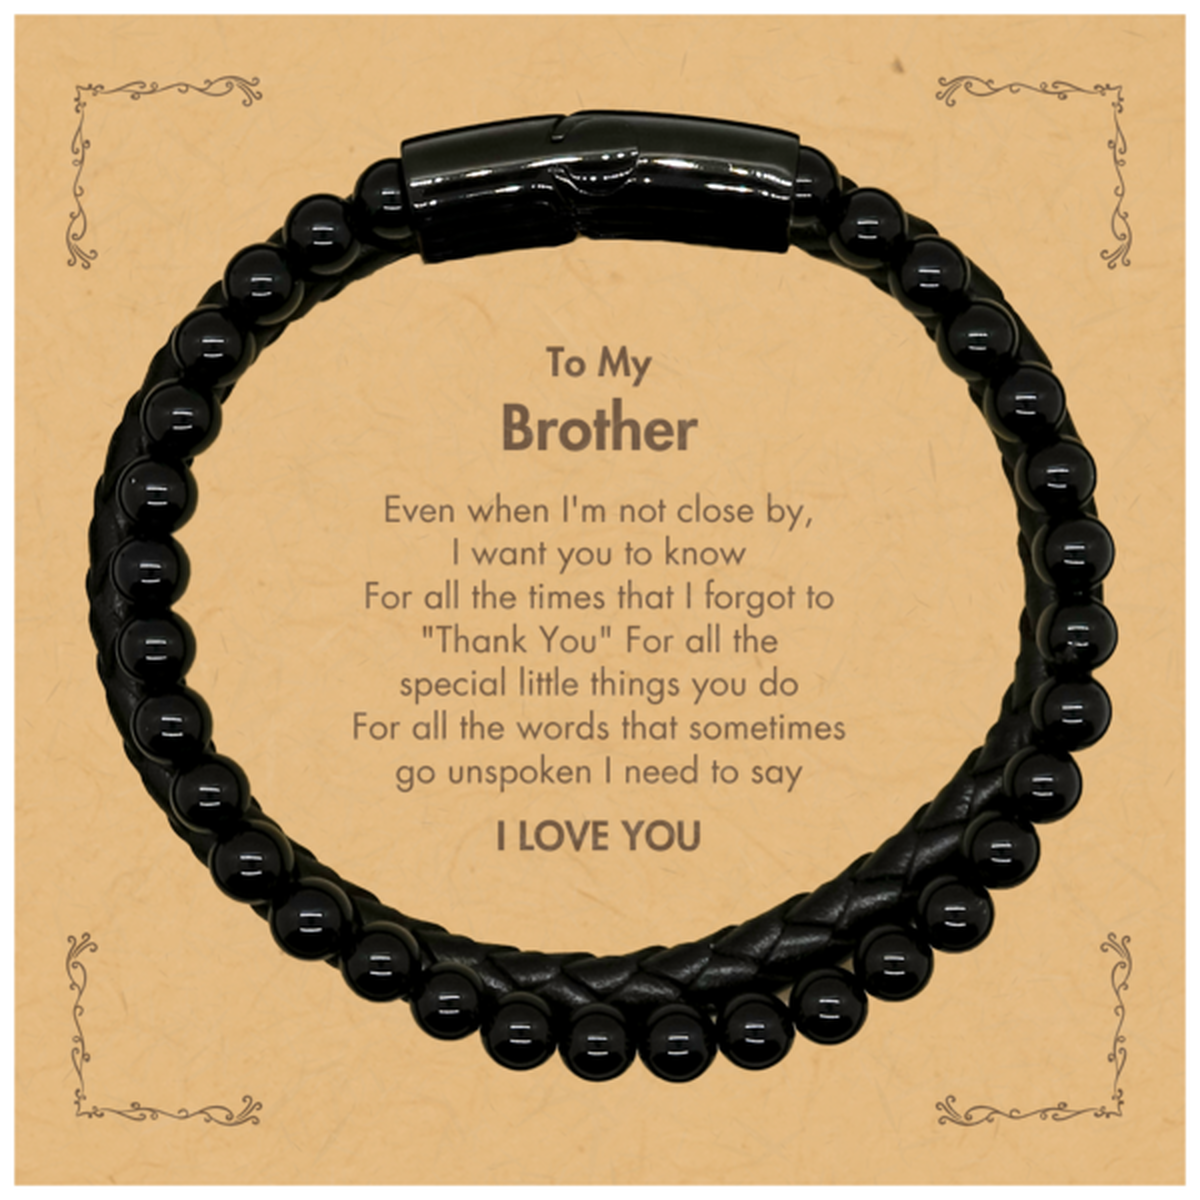 Thank You Gifts for Brother, Keepsake Stone Leather Bracelets Gifts for Brother Birthday Mother's day Father's Day Brother For all the words That sometimes go unspoken I need to say I LOVE YOU